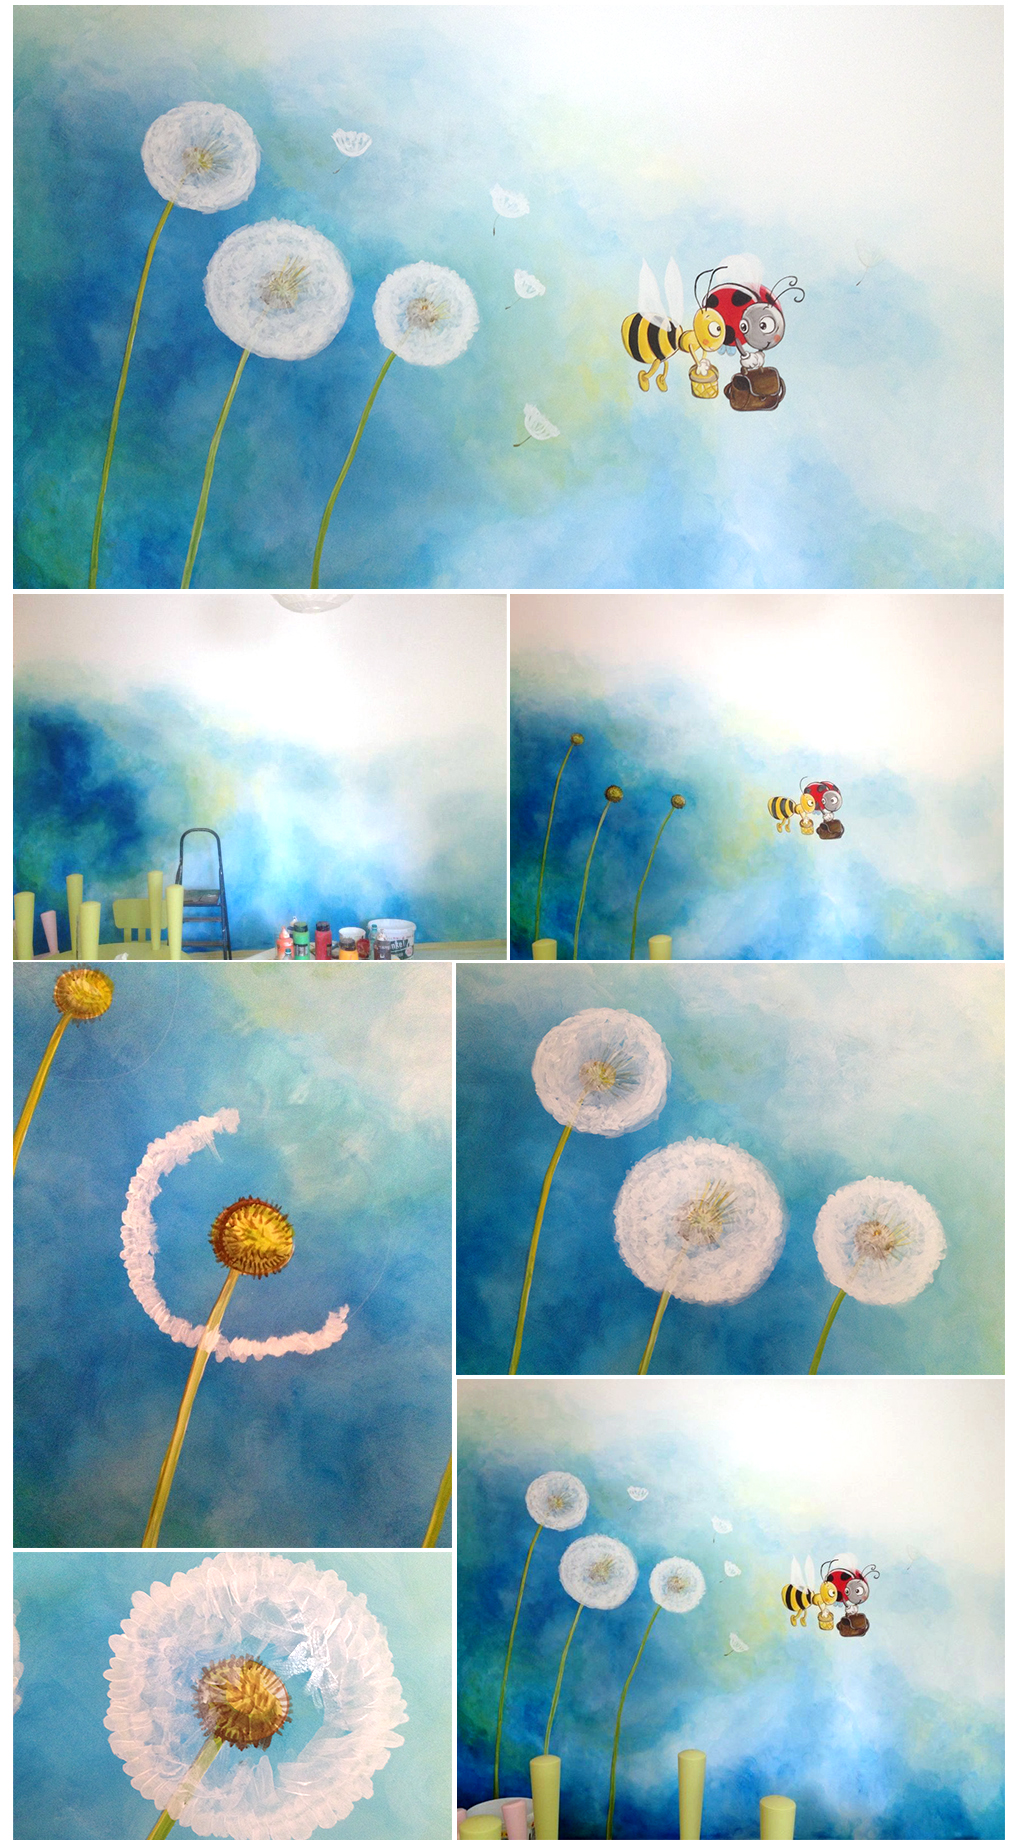 Tara Viselor – The Bees and the Dandelion